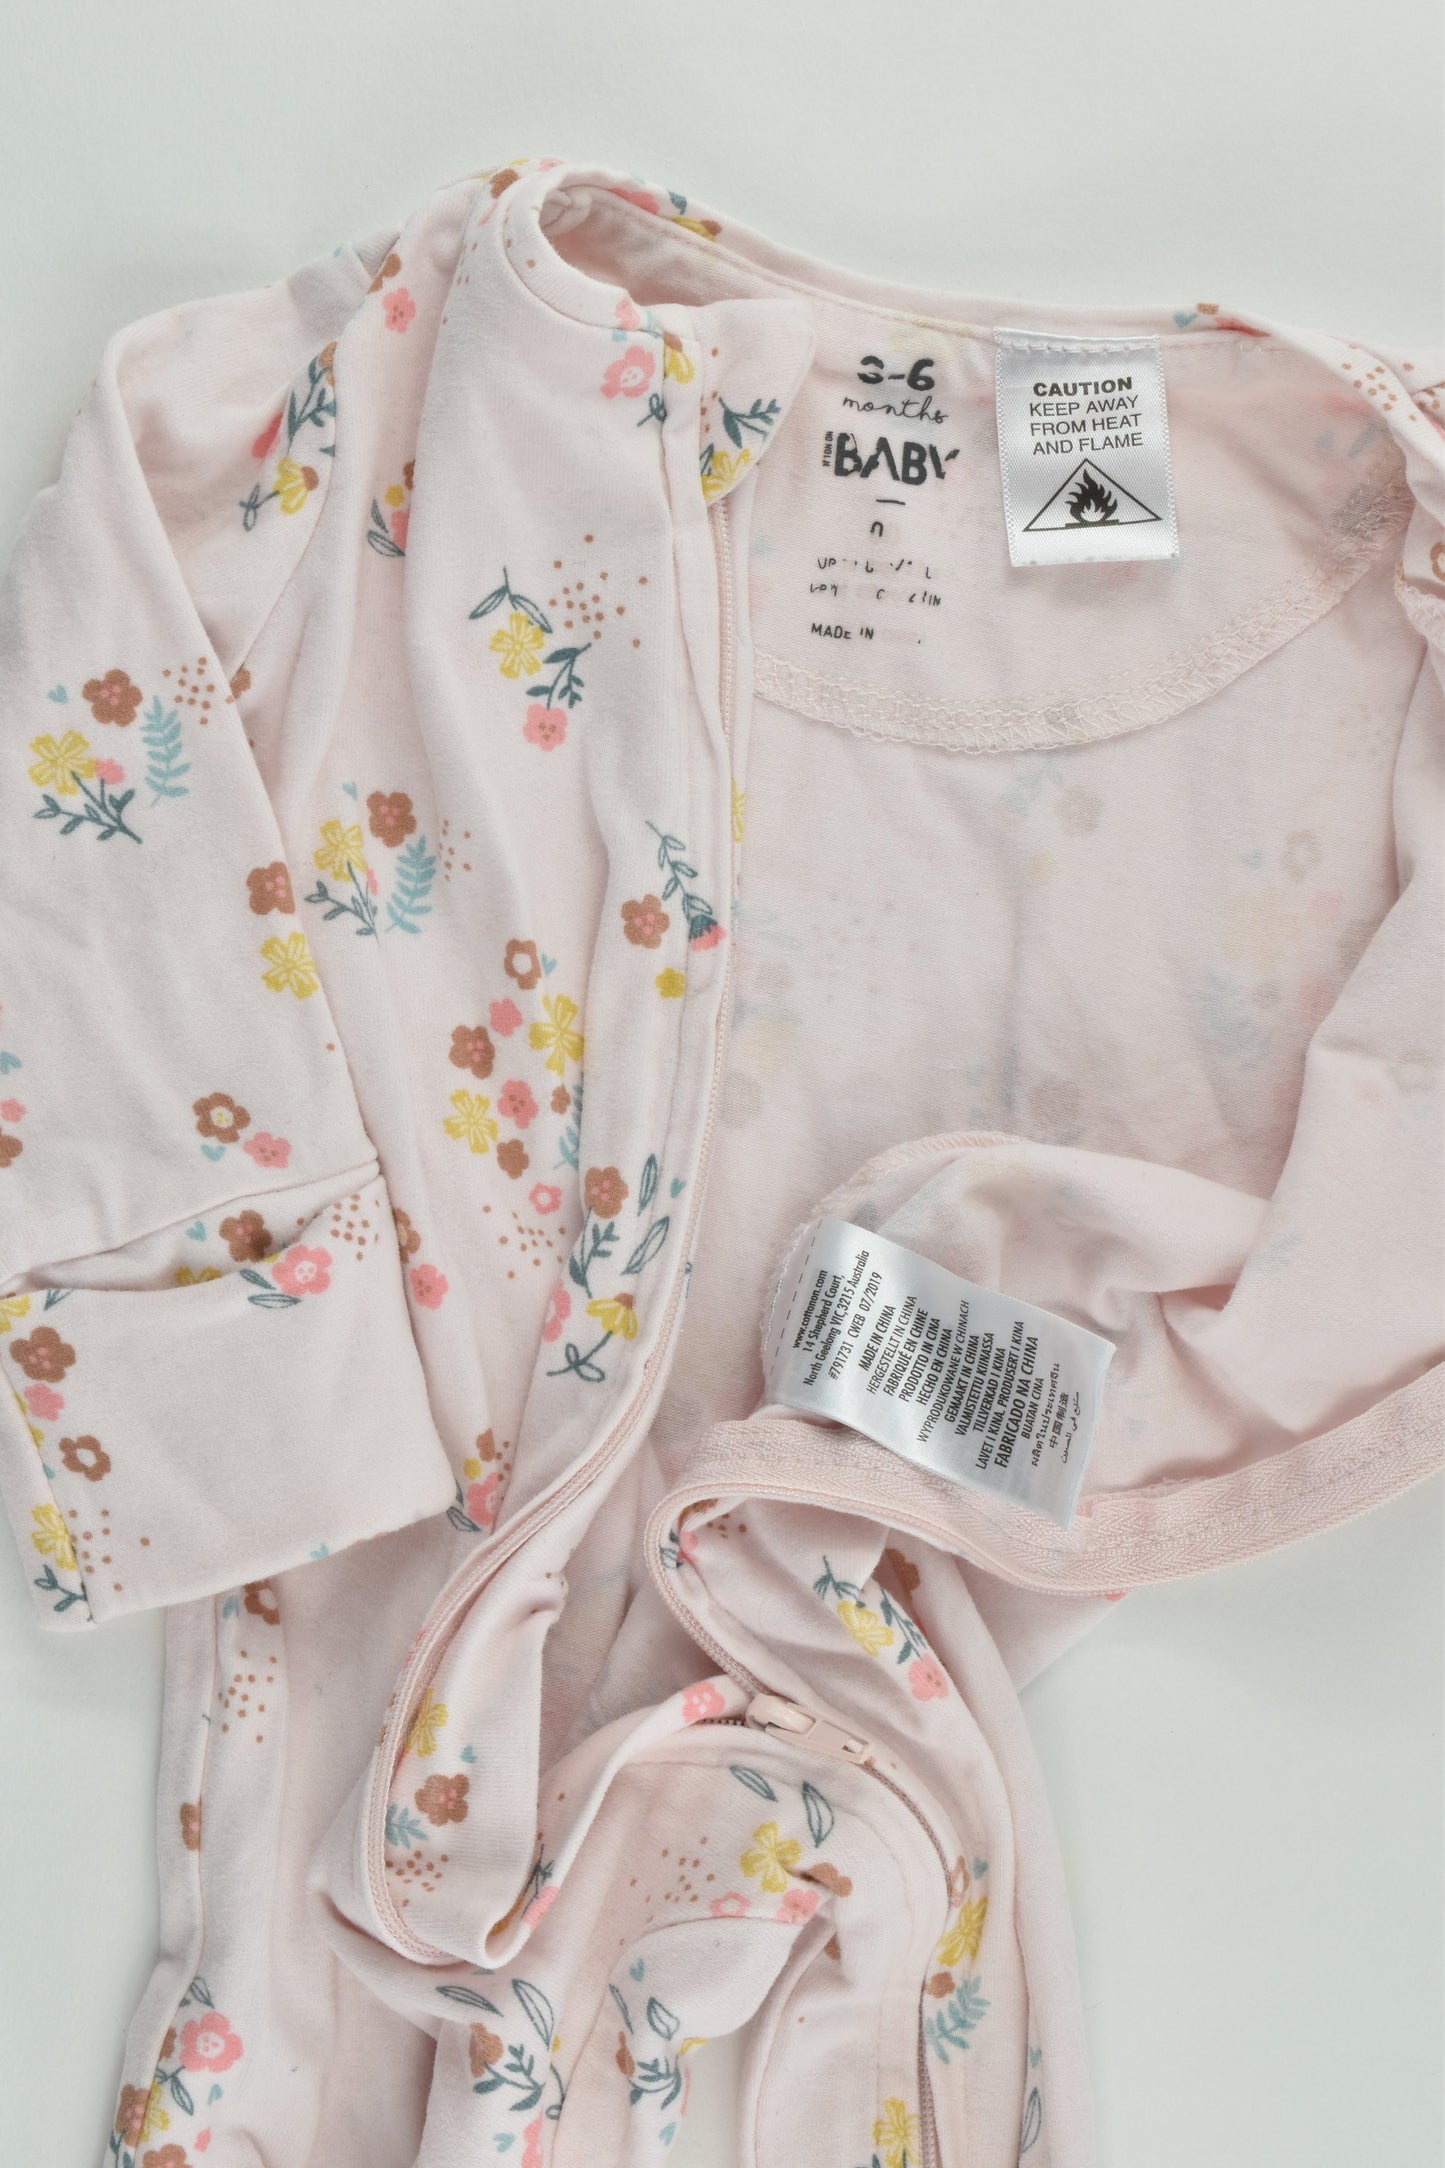 Cotton On Baby Size 00 (3-6 months) Floral Footed Romper